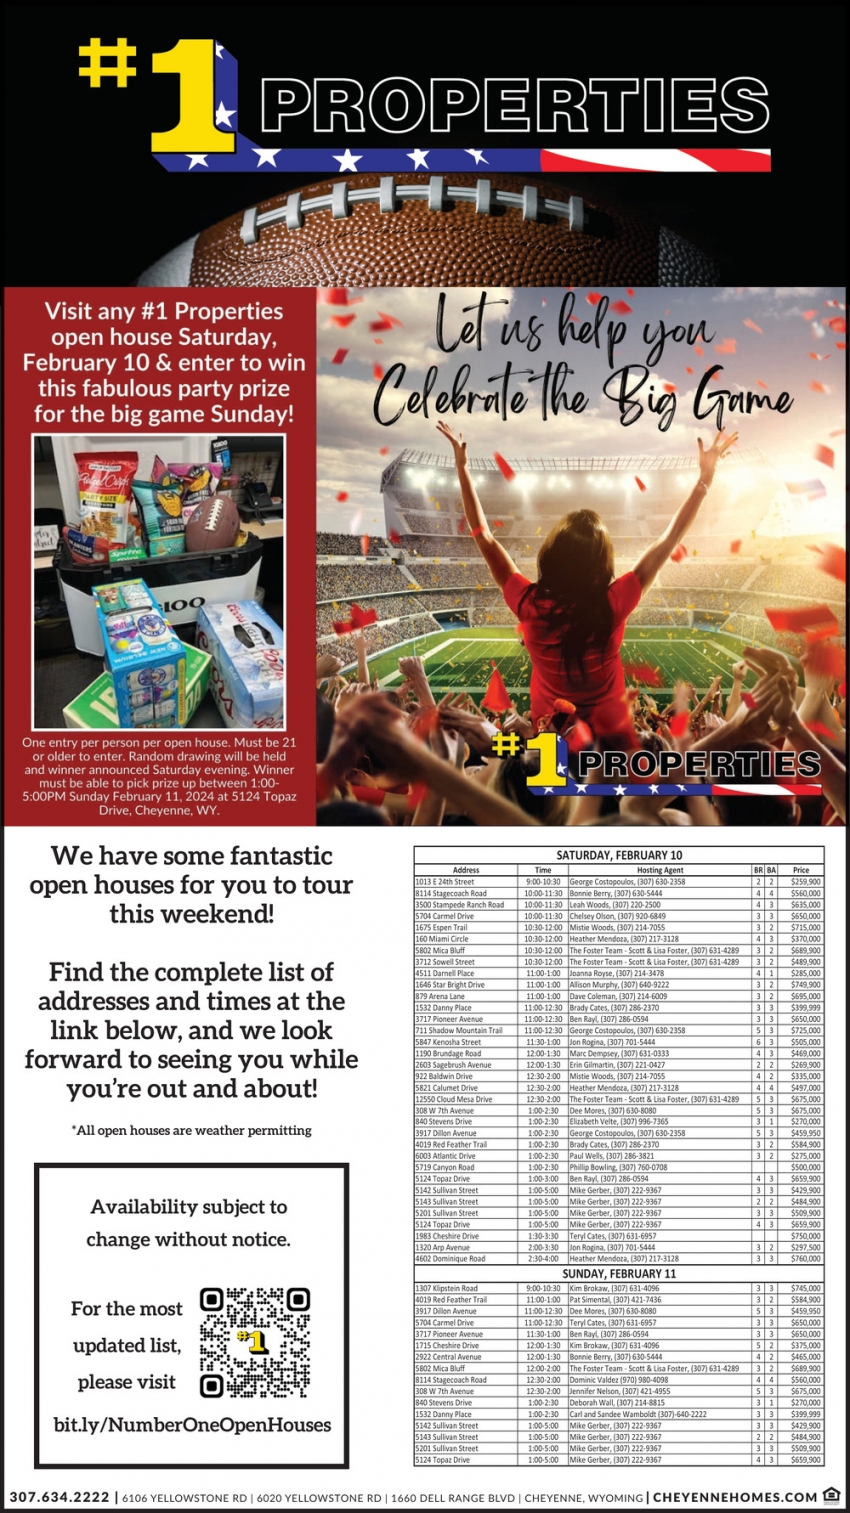 Let Us Help You Celebrate the Big Game